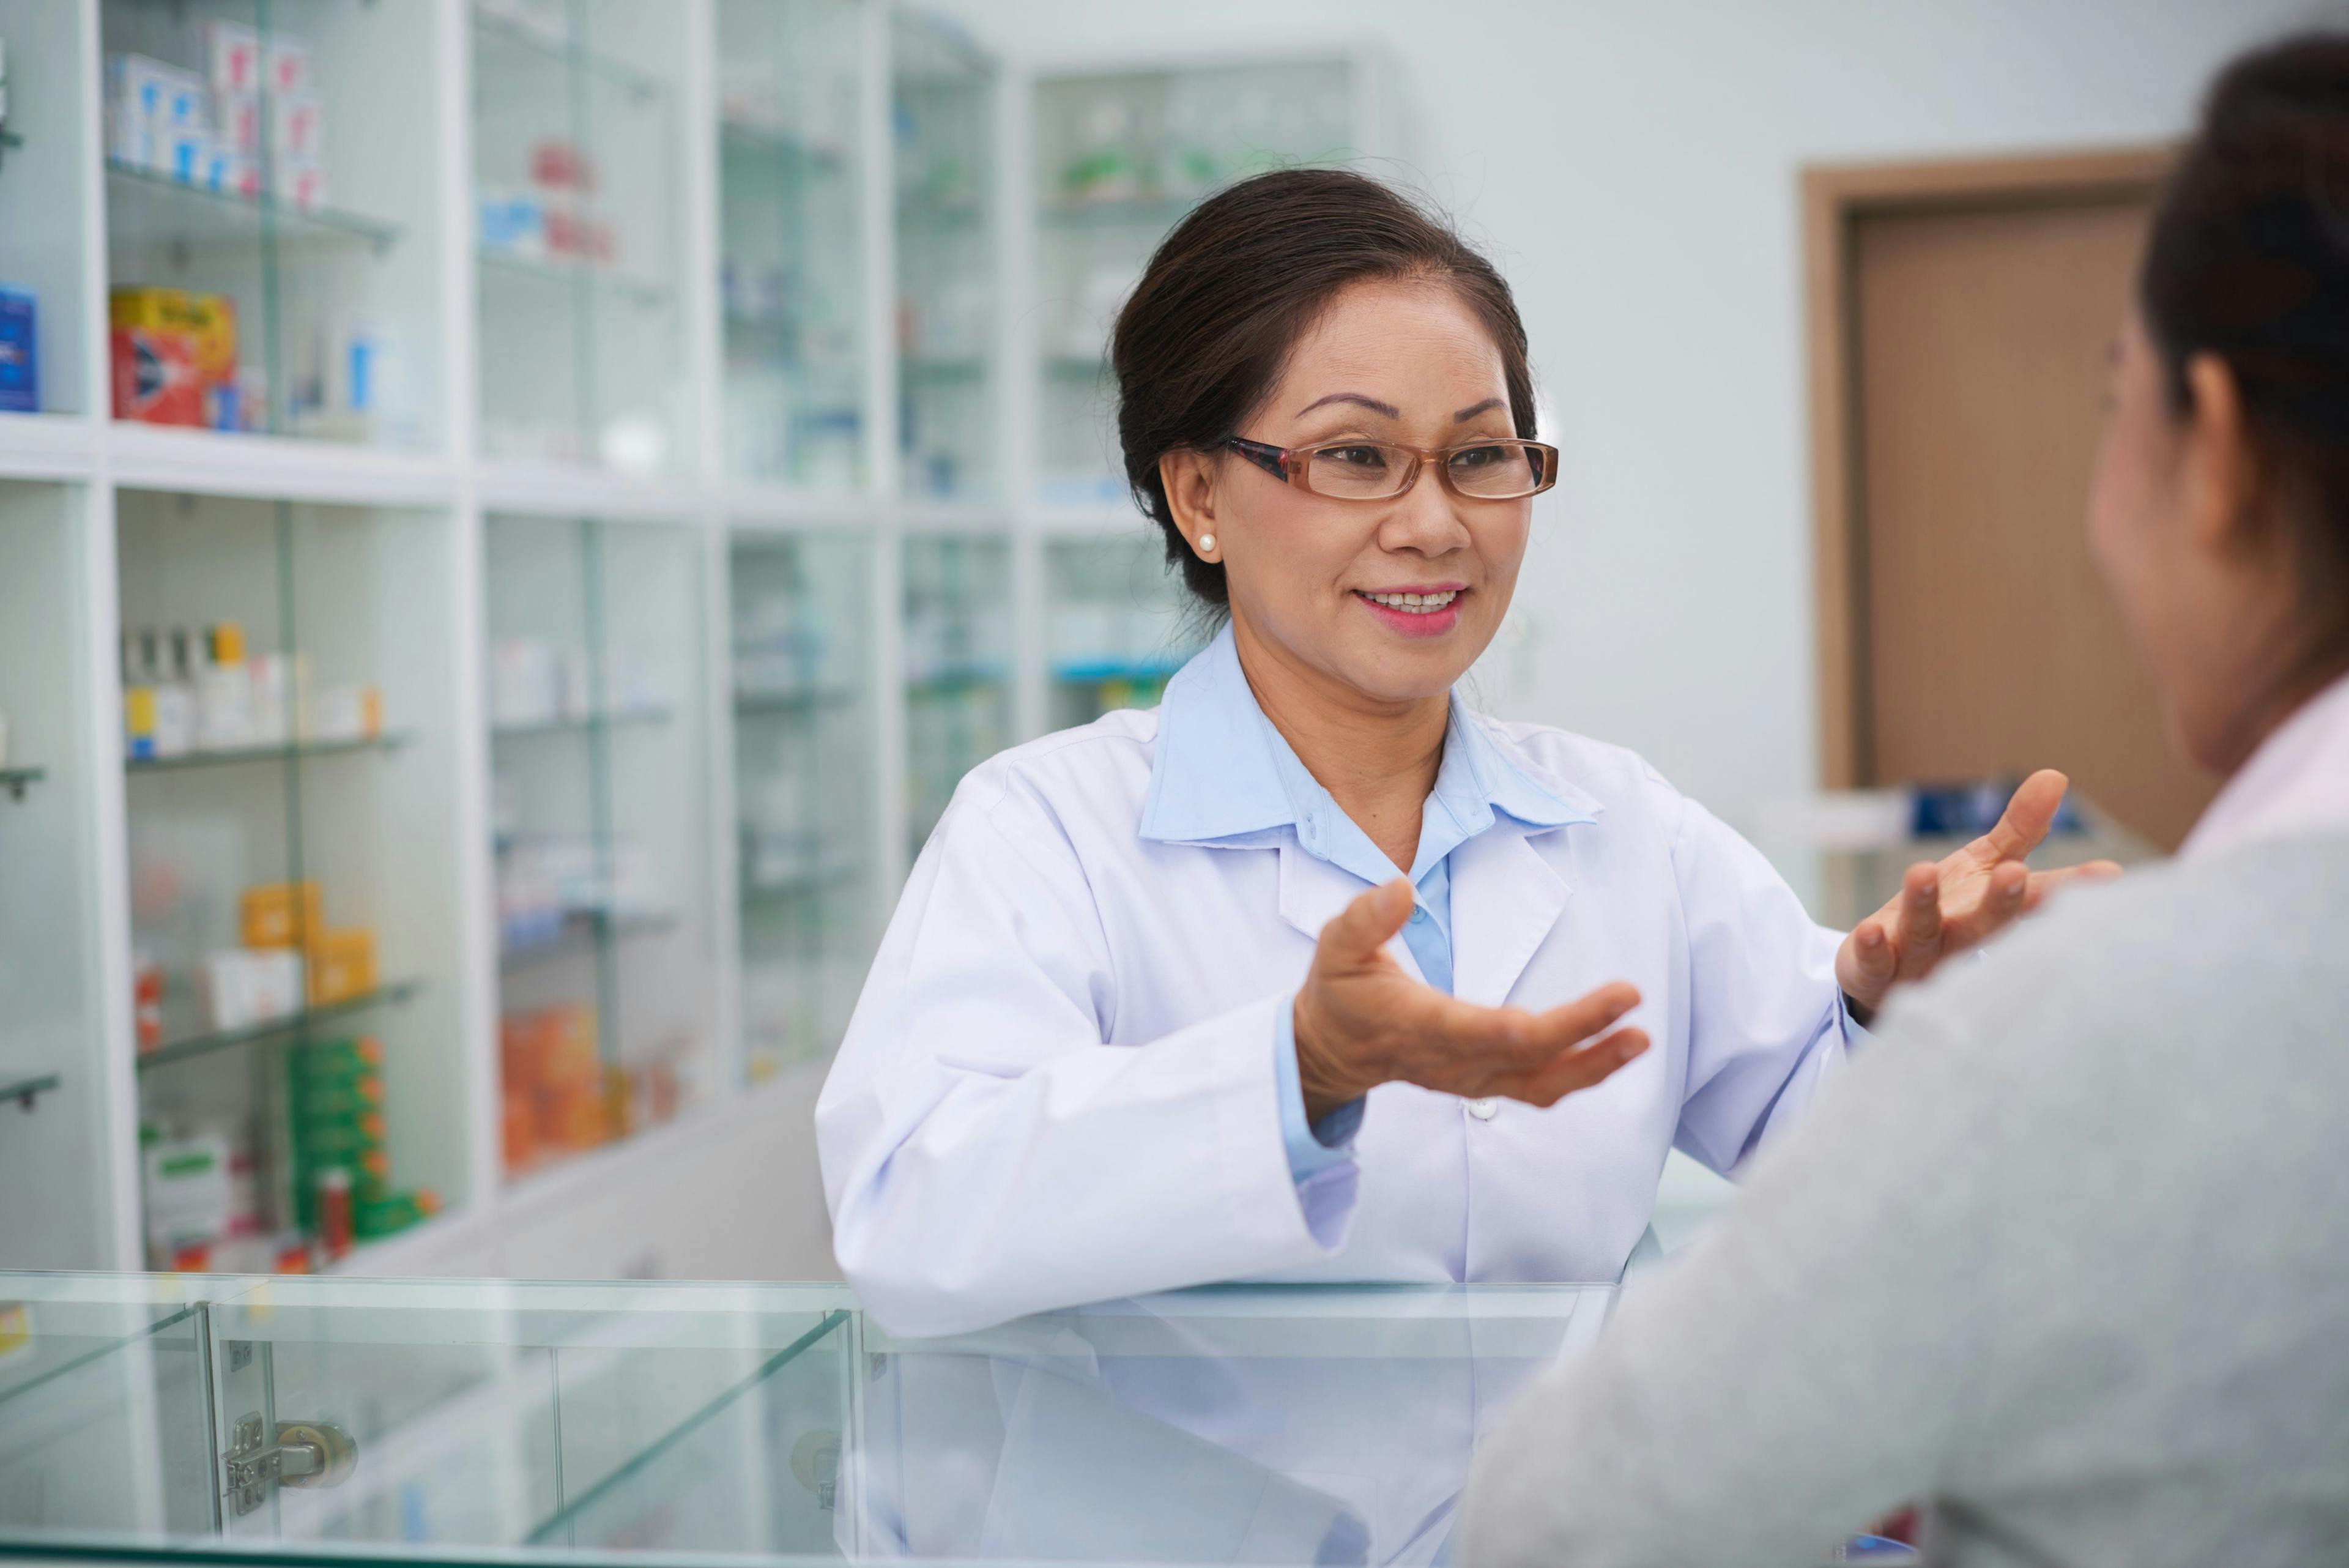 How Pharmacists Can Help Address Health Care Disparities in BIPOC Communities